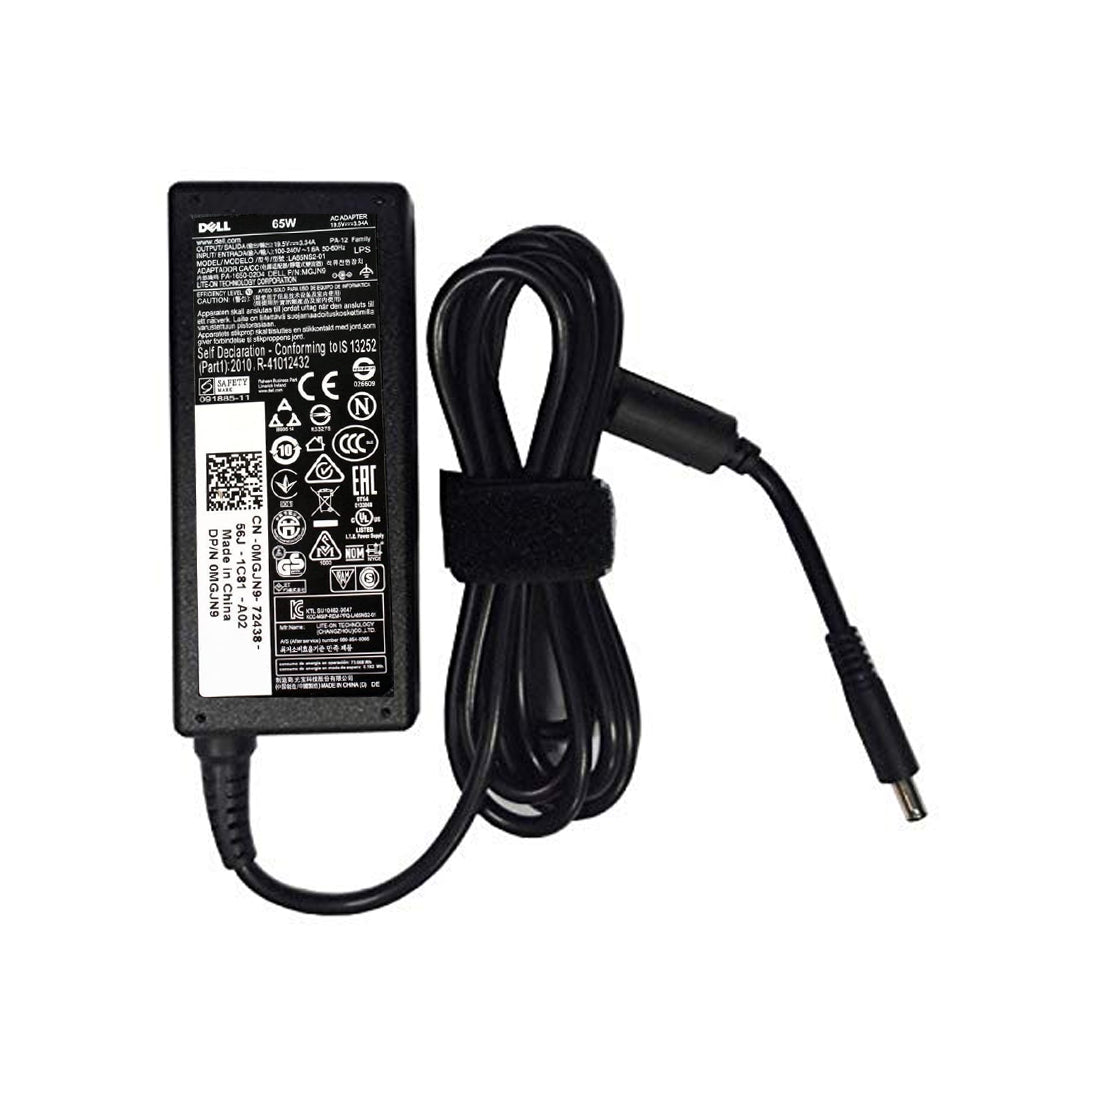 Dell Original 65W 19.5V 4.5mm Pin Laptop Charger Adapter for Inspiron 11 3158 With Power Cord